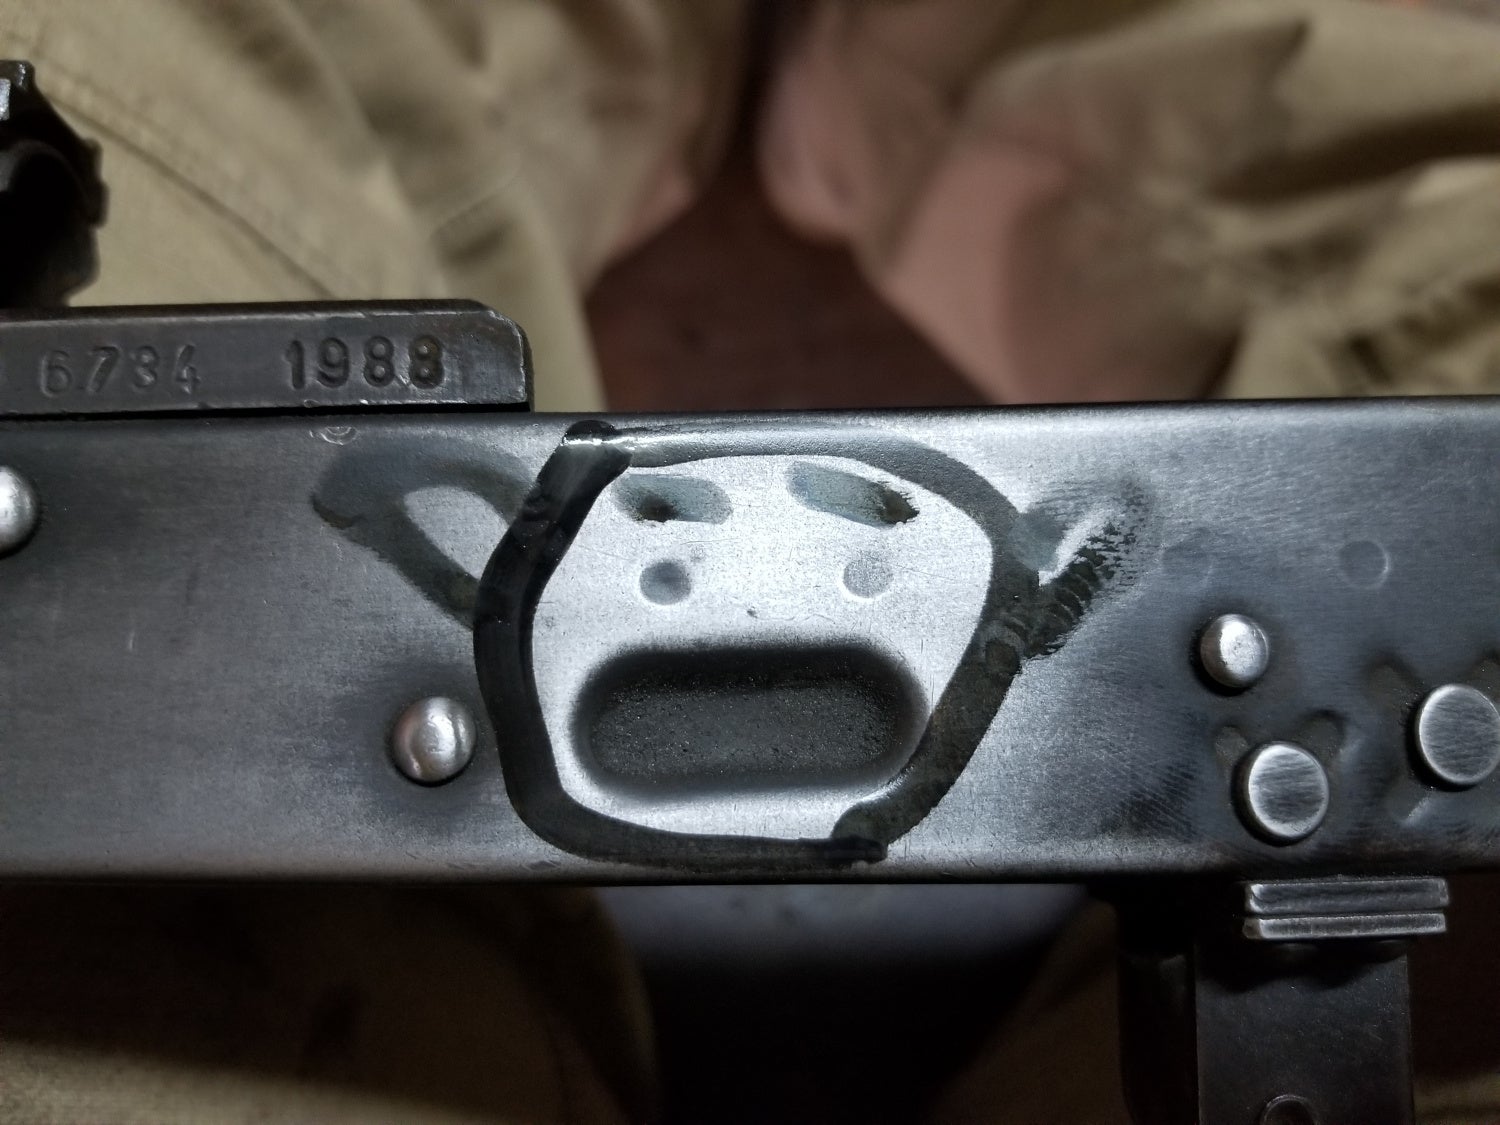 If you spend too much time around AKs you start to notice that magazine dimple looks like a face.